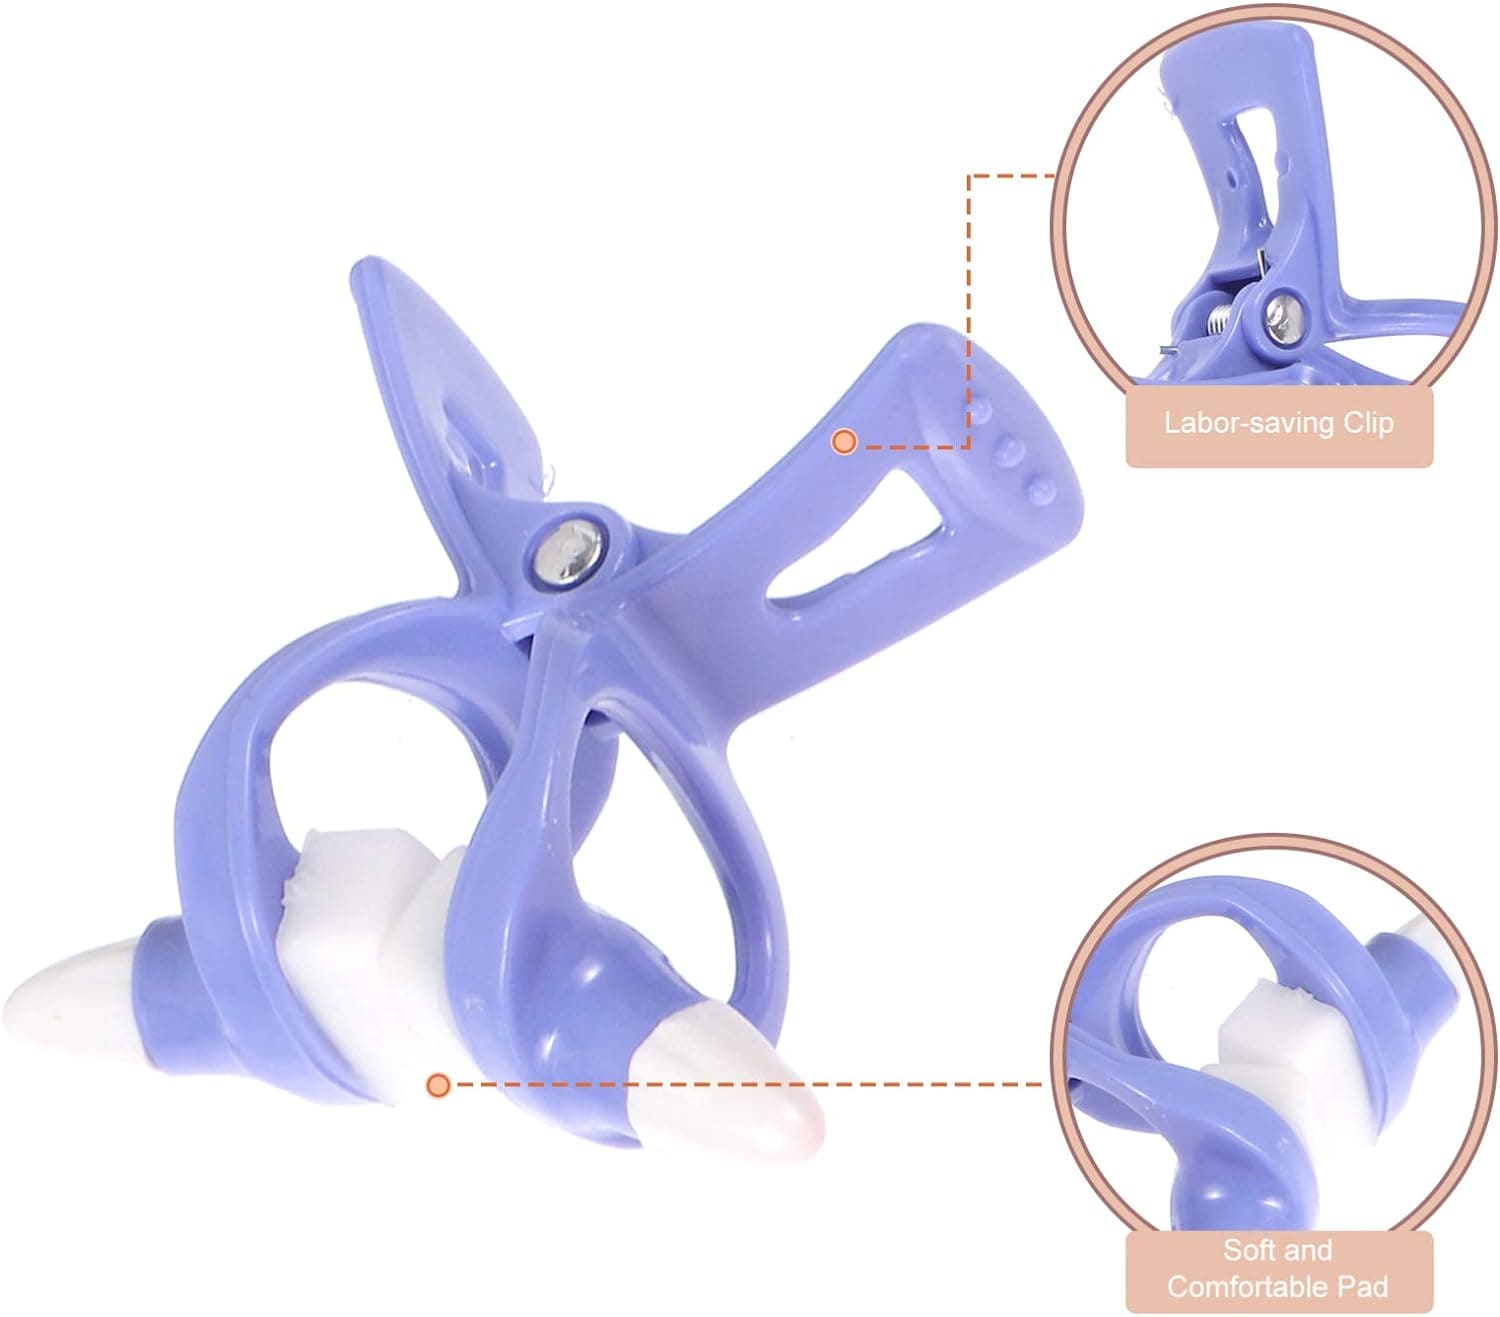 Nose Up Clip, Nose Up Clip Shaping Shaper Lifting, Nose Aligner Slimming Tool, Silicone Nose Shaper Lifter Clip